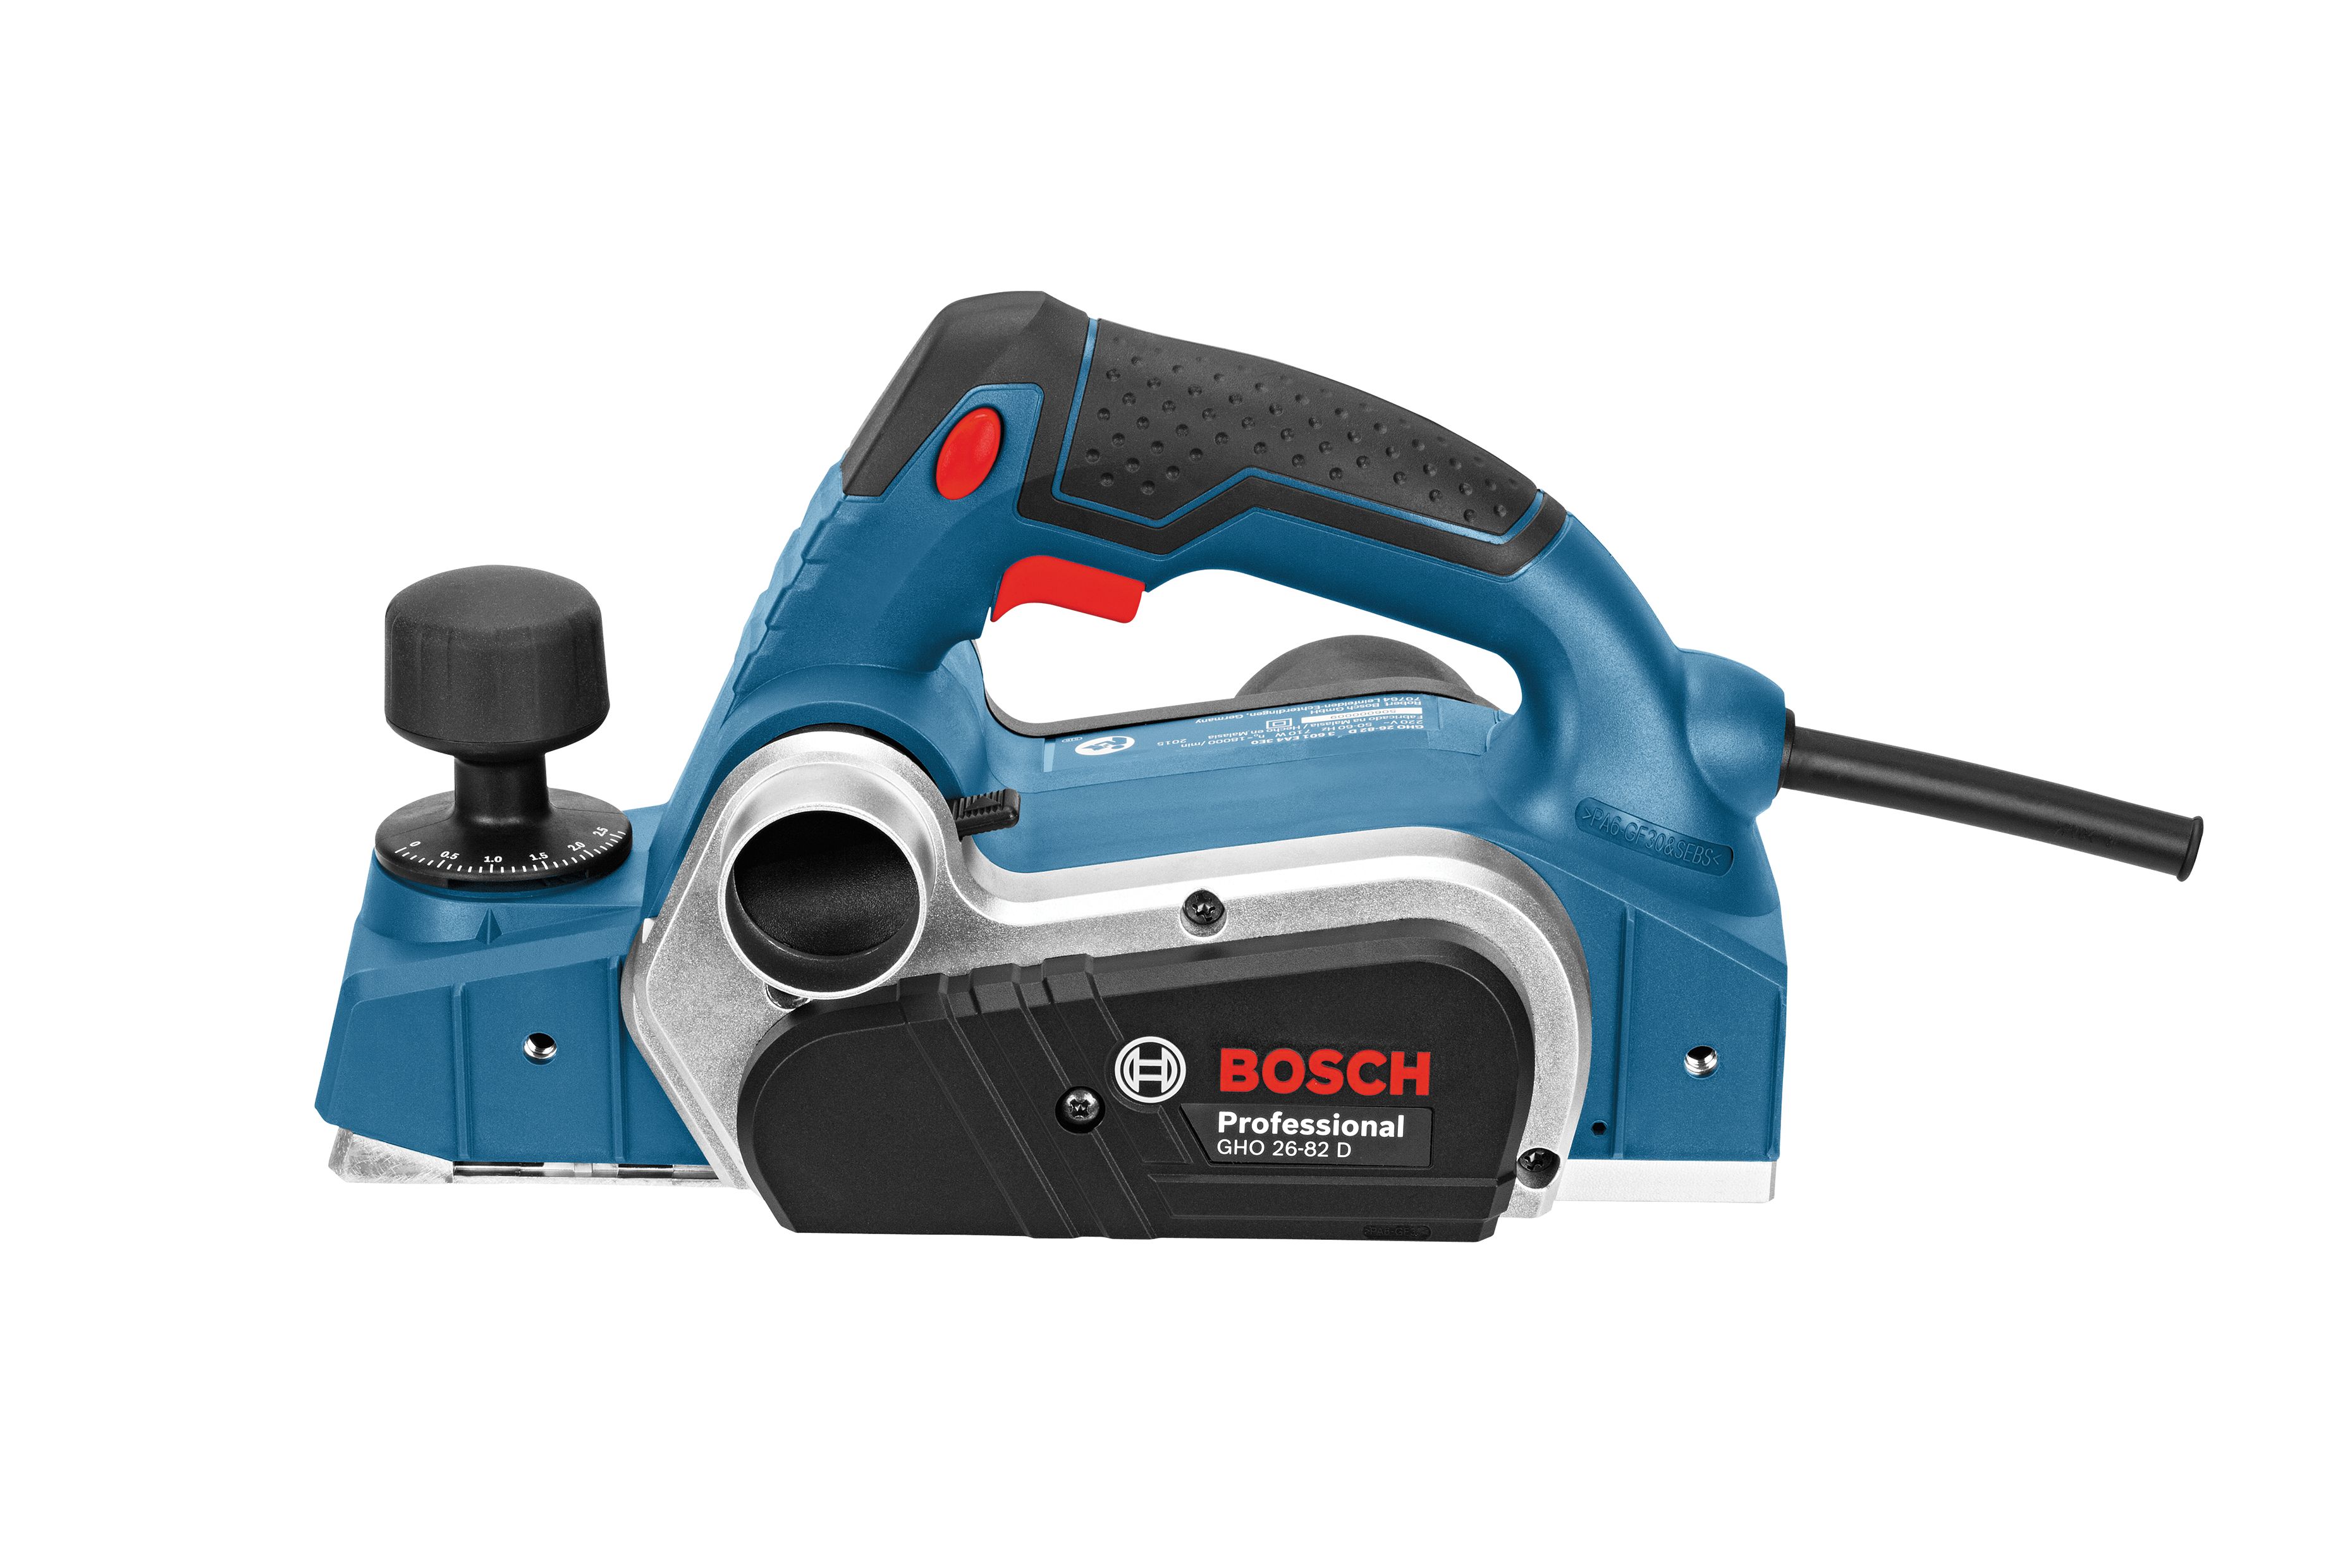 Image of Bosch Professional GHO 26-82 D Corded Planer - 710W